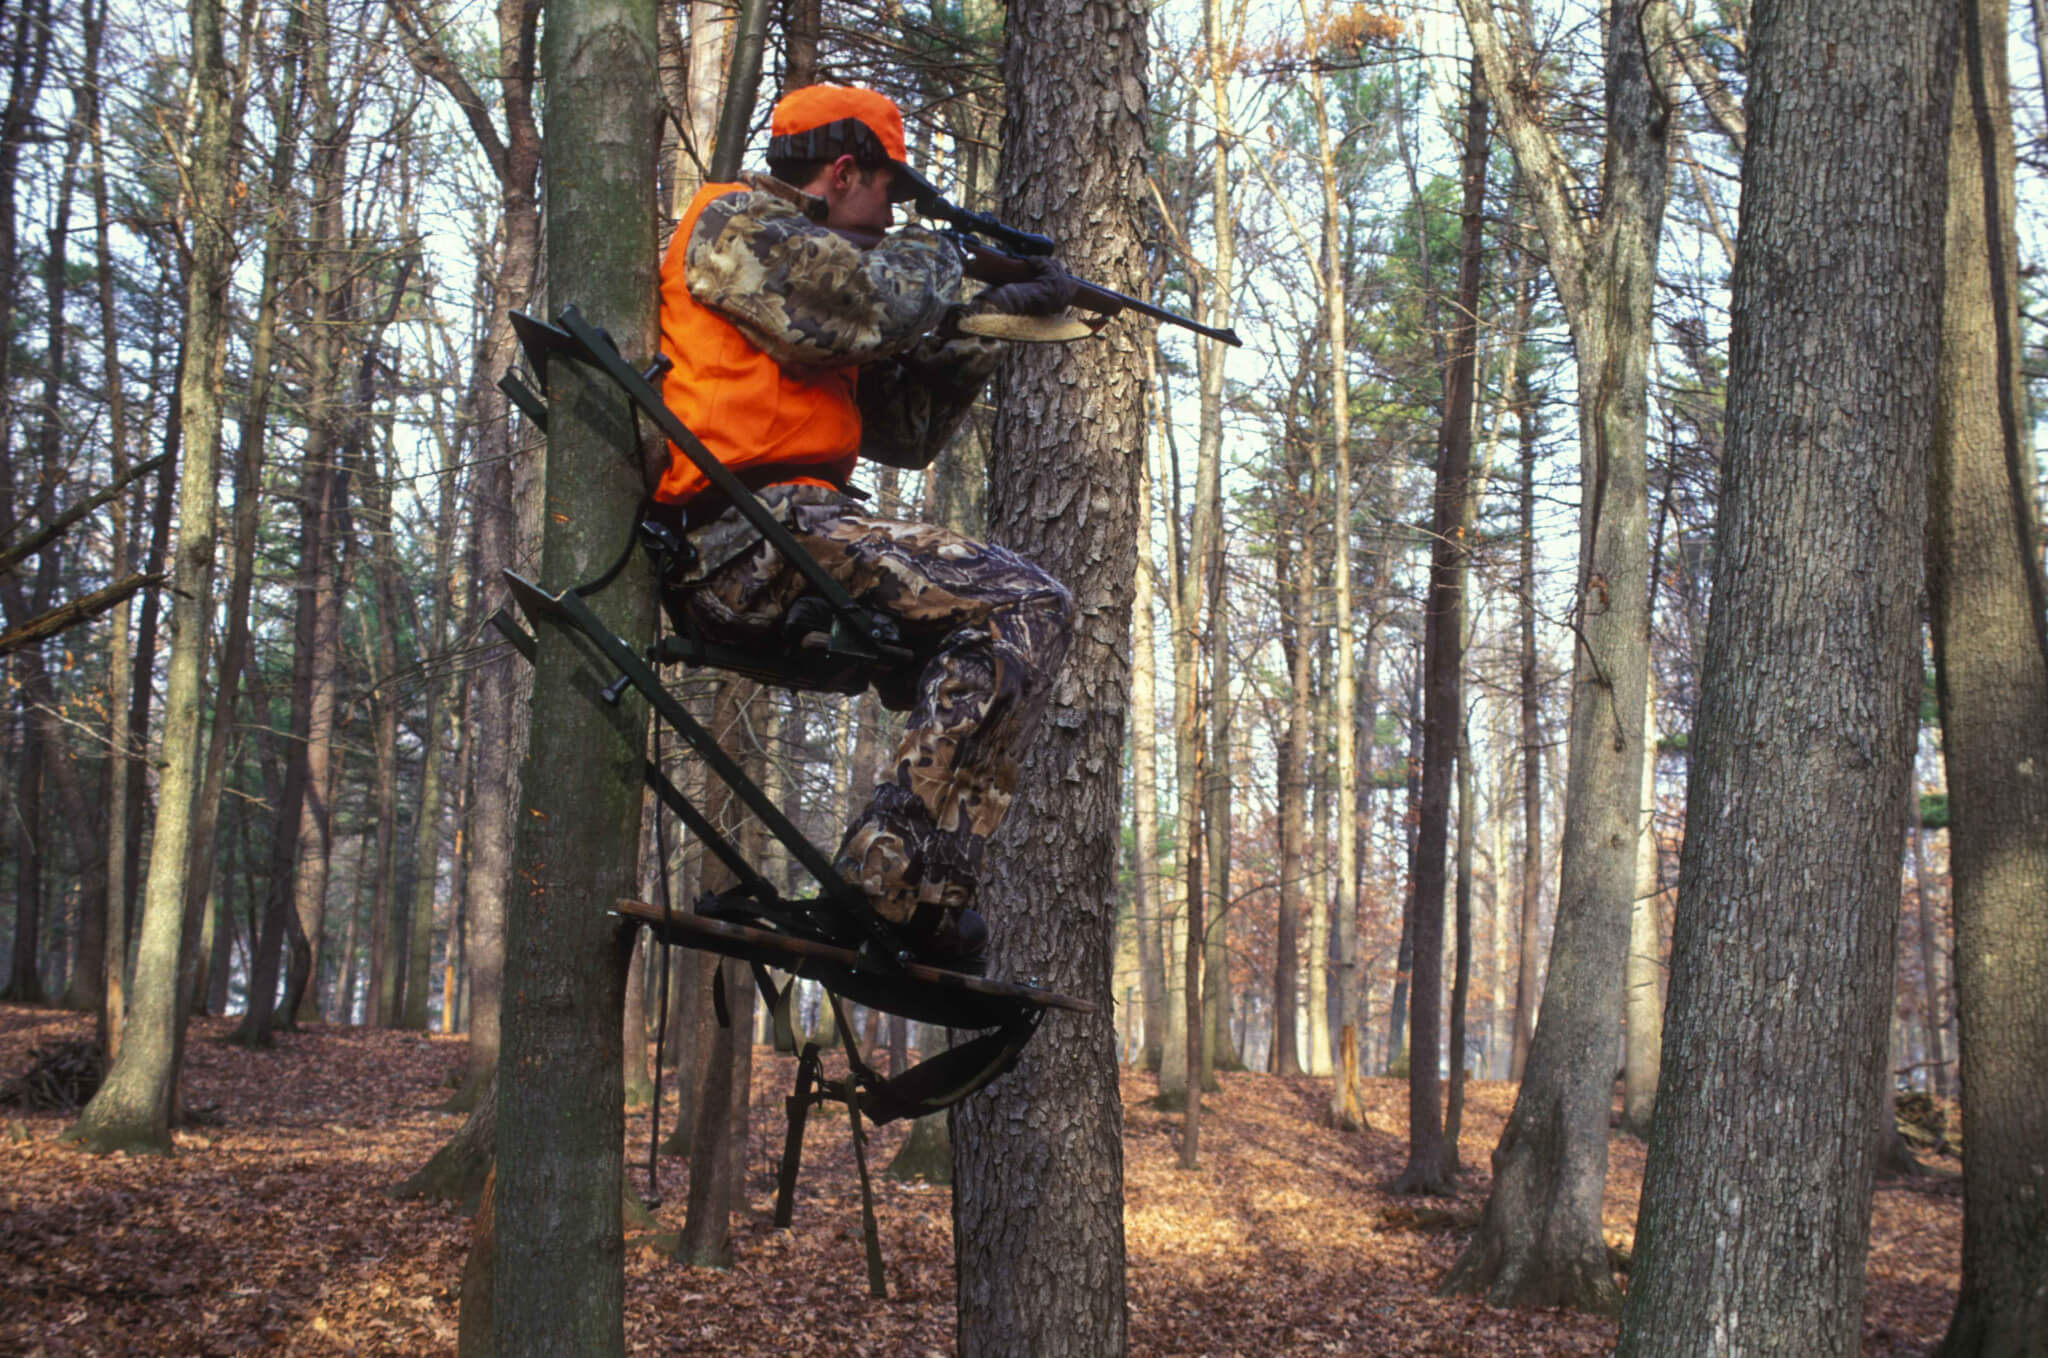 Hunting requires that you know safety rules and regulations.